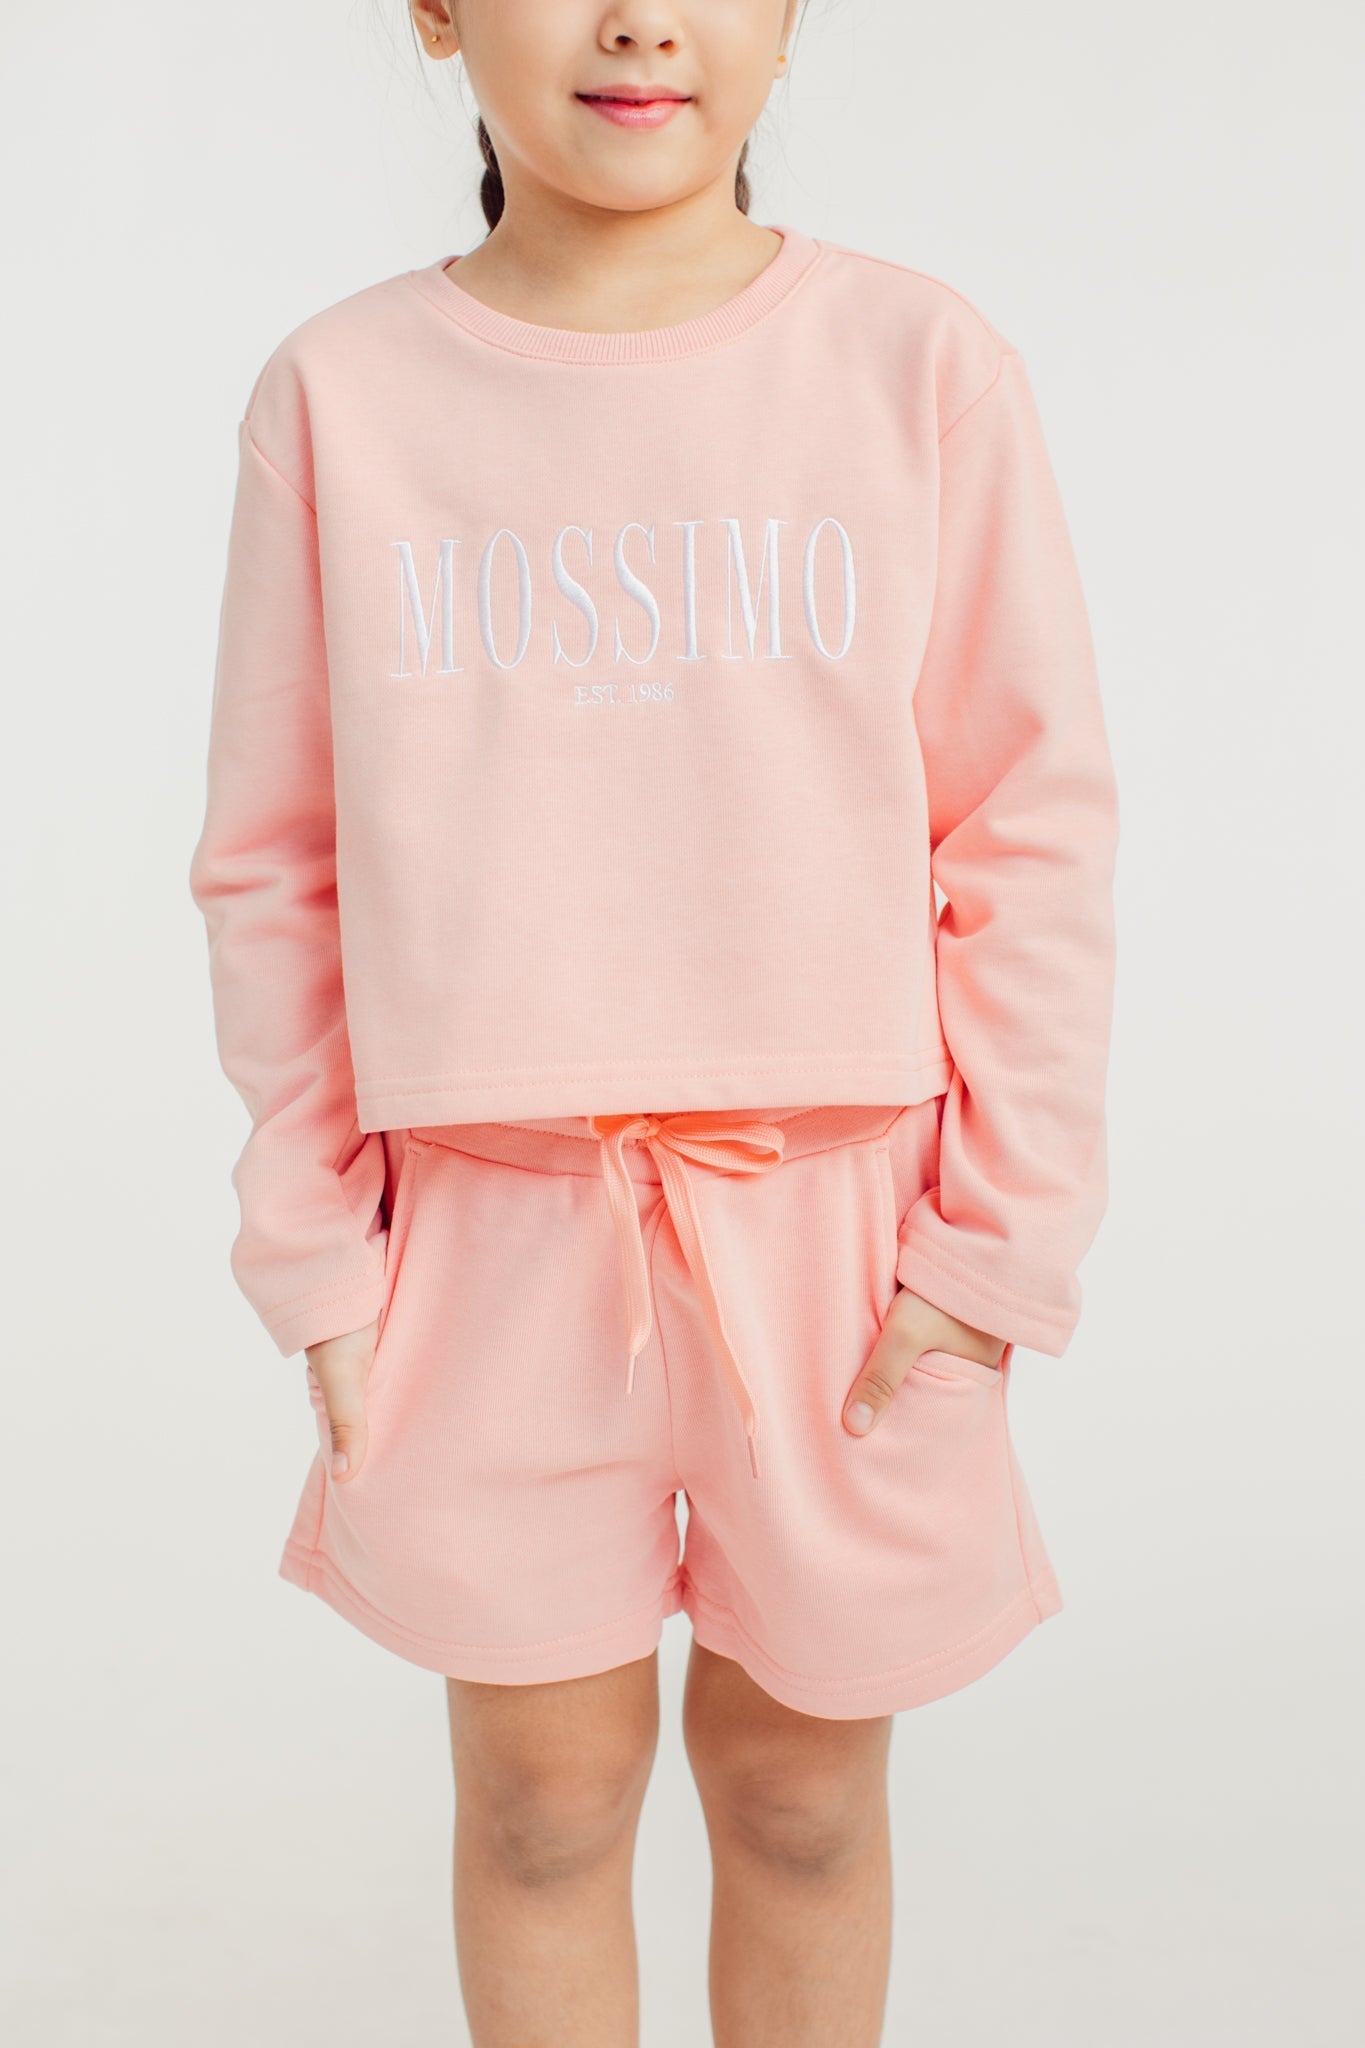 Mossimo Krissa Pink Cropped Pullover and Short Girls Set Kids - Mossimo PH